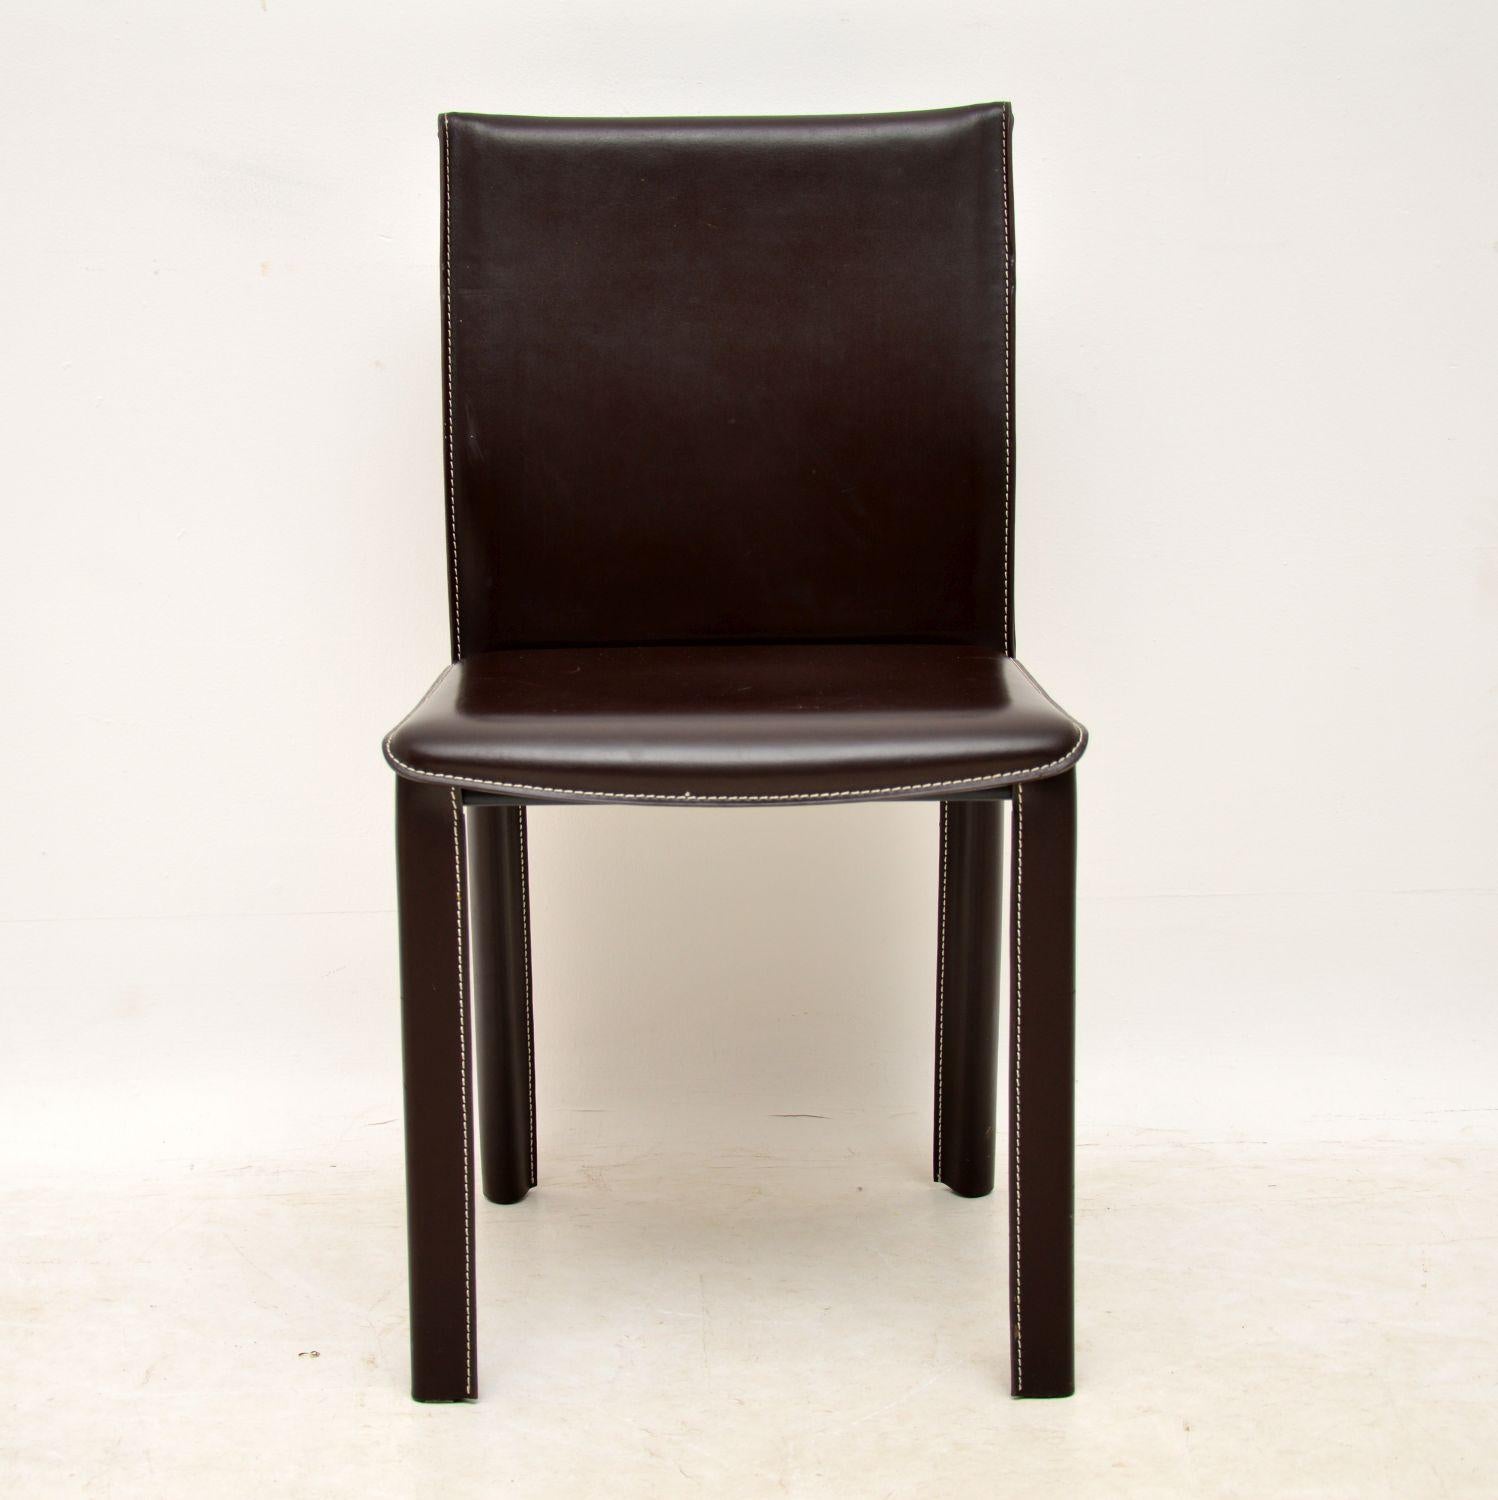 arper dining chairs